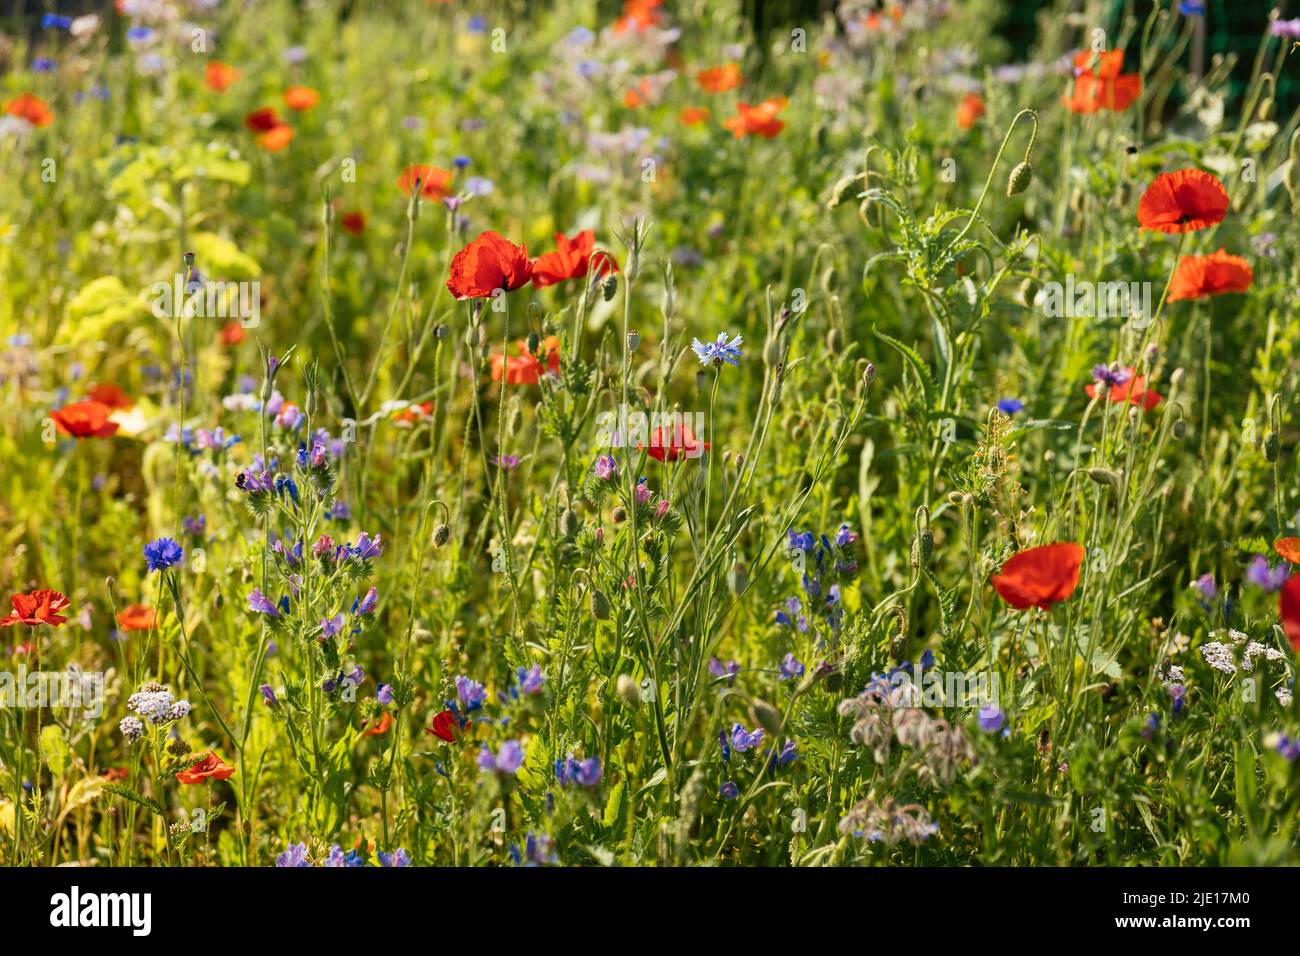 Wild flower area in a garden to support bees and other insects. Stock Photo